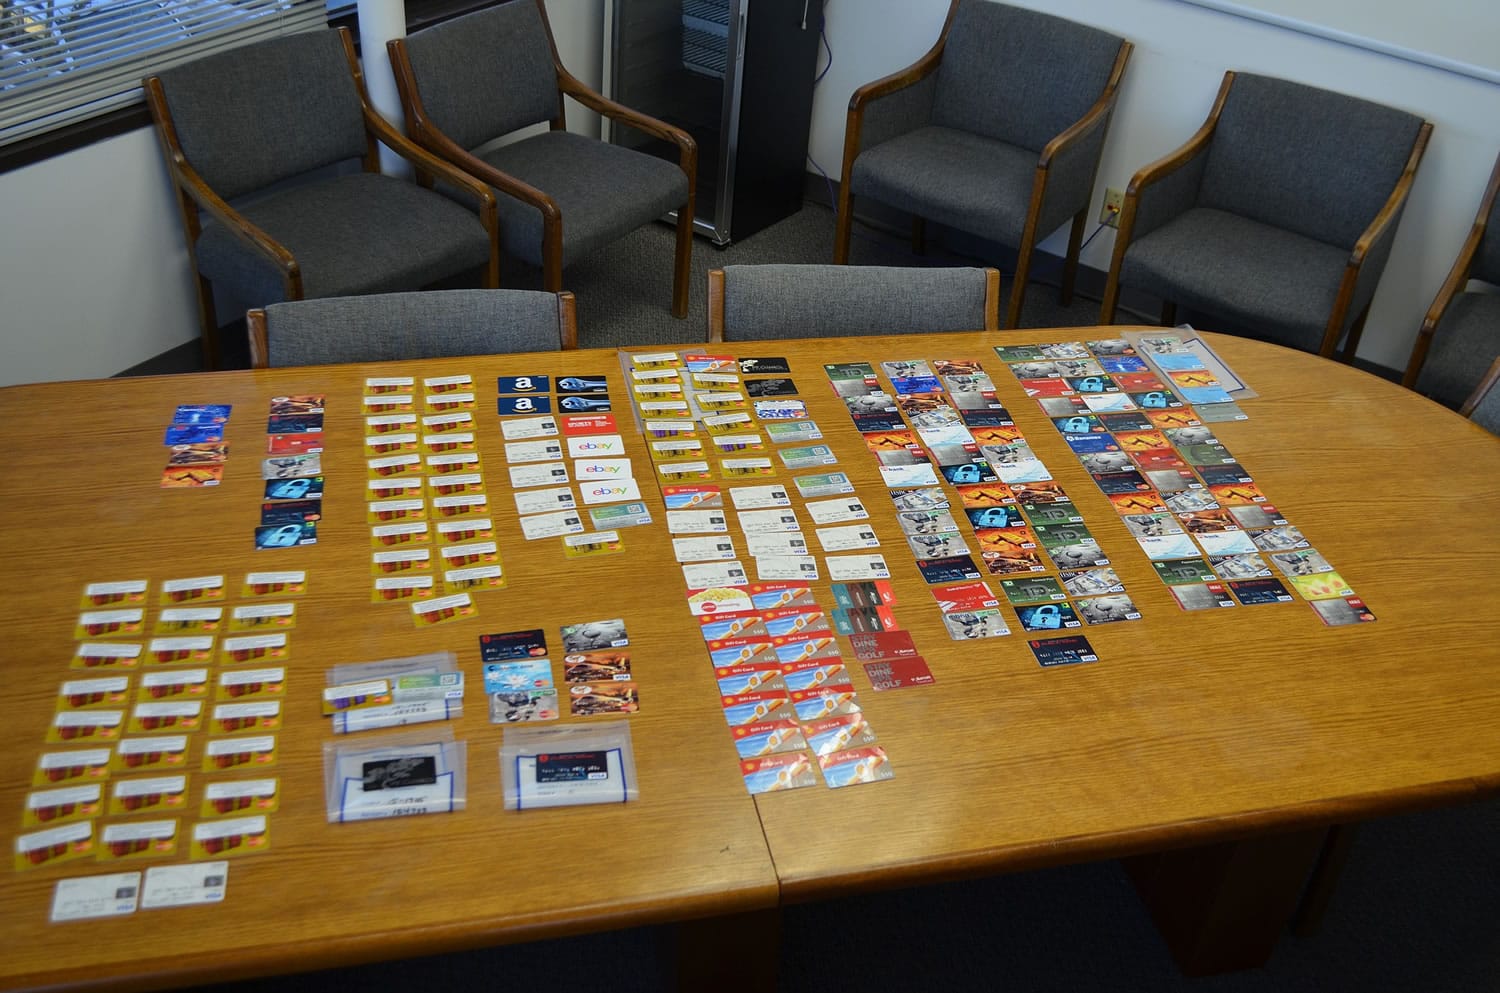 Some of the evidence seized as part of an investigation into a counterfeit credit card ring is shown in this photo provided by Beaverton, Ore.